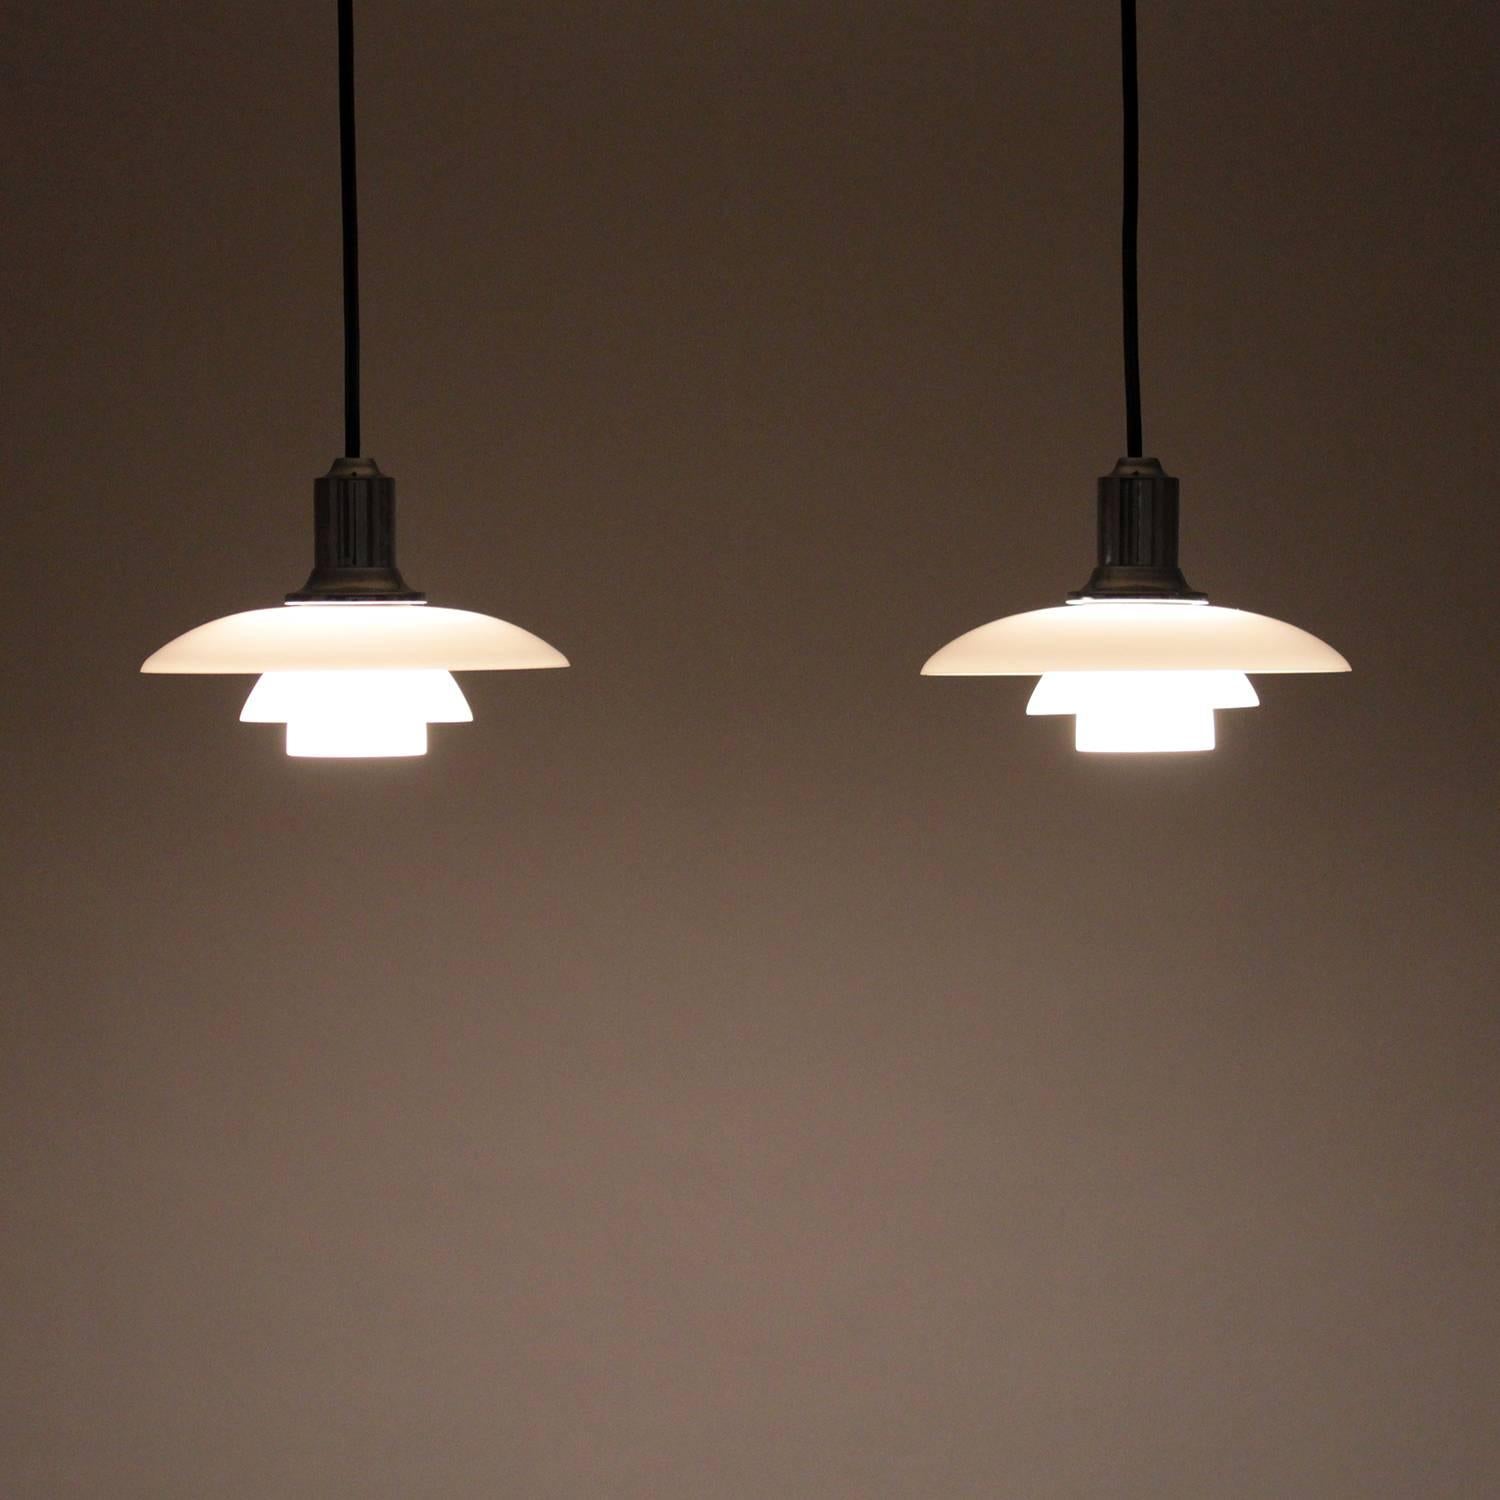 PH 2/1 - an absolutely stunning pair of Danish design pieces by the 